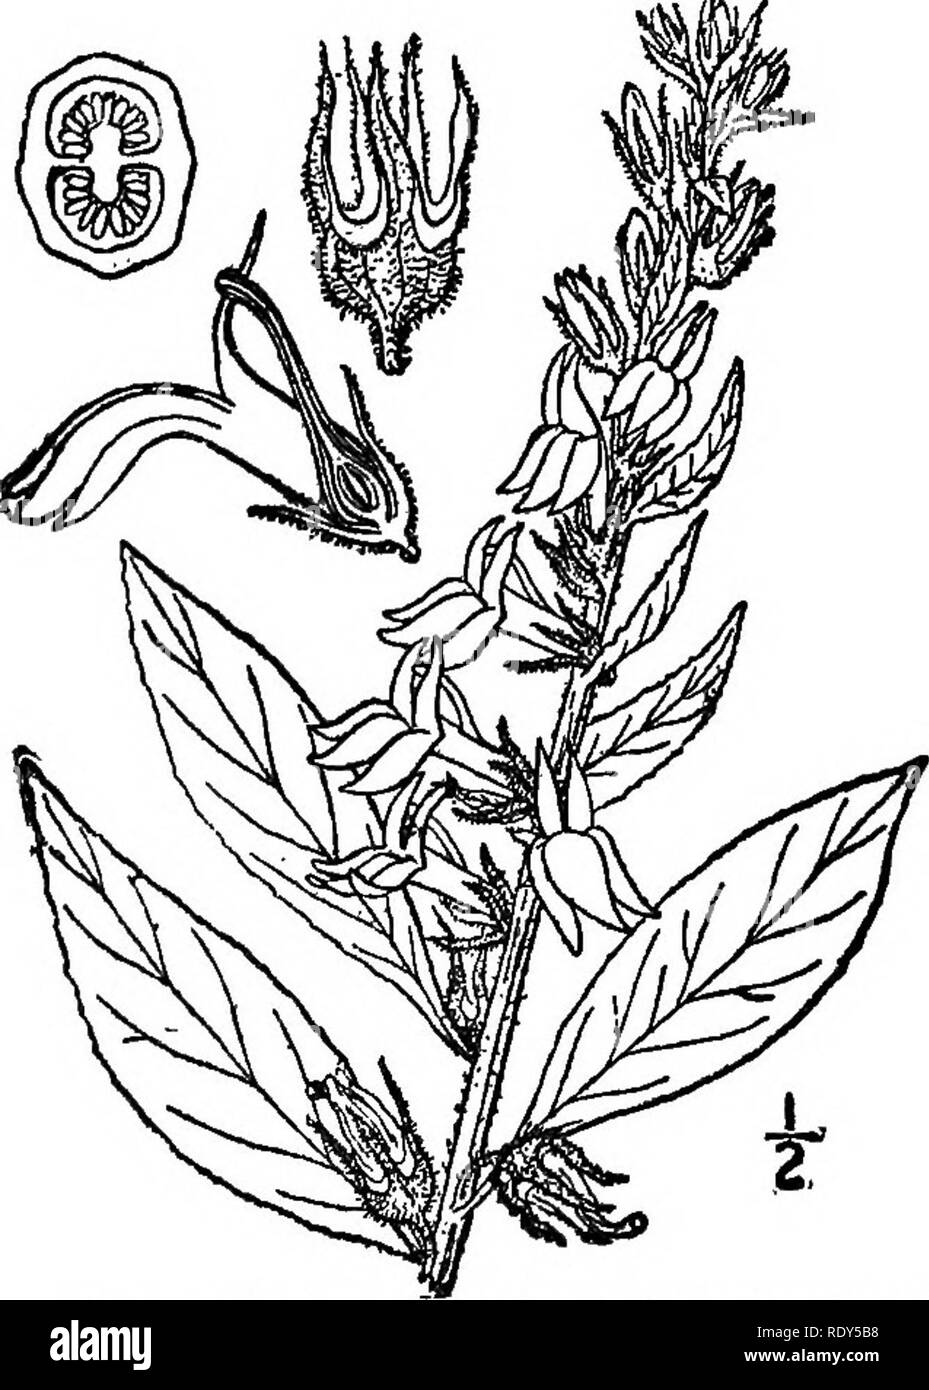 . The families of flowering plants. Plants; Phanerogams. FAMILIES OF FLOWEEING PLANTS 249. Fig. 2i8. The great blue lobelia iLobelia syphil- ilica,) After Bntton and Brown, 111. FI. North- east. U. S. panded into a flat strap-shaped or Ugulate portion known as a ray; the rays make up the conspicuous por- tion of the flower, and are what seem to be petals. Anthers united into a tube around the style, the anther sacs appendaged at the base and summit. Style slender and 2-clefti Ovary 1-oelled, with a single ovule, becoming a small seed-like fruit known as an achene. Fig. 219, re- presenting the  Stock Photo